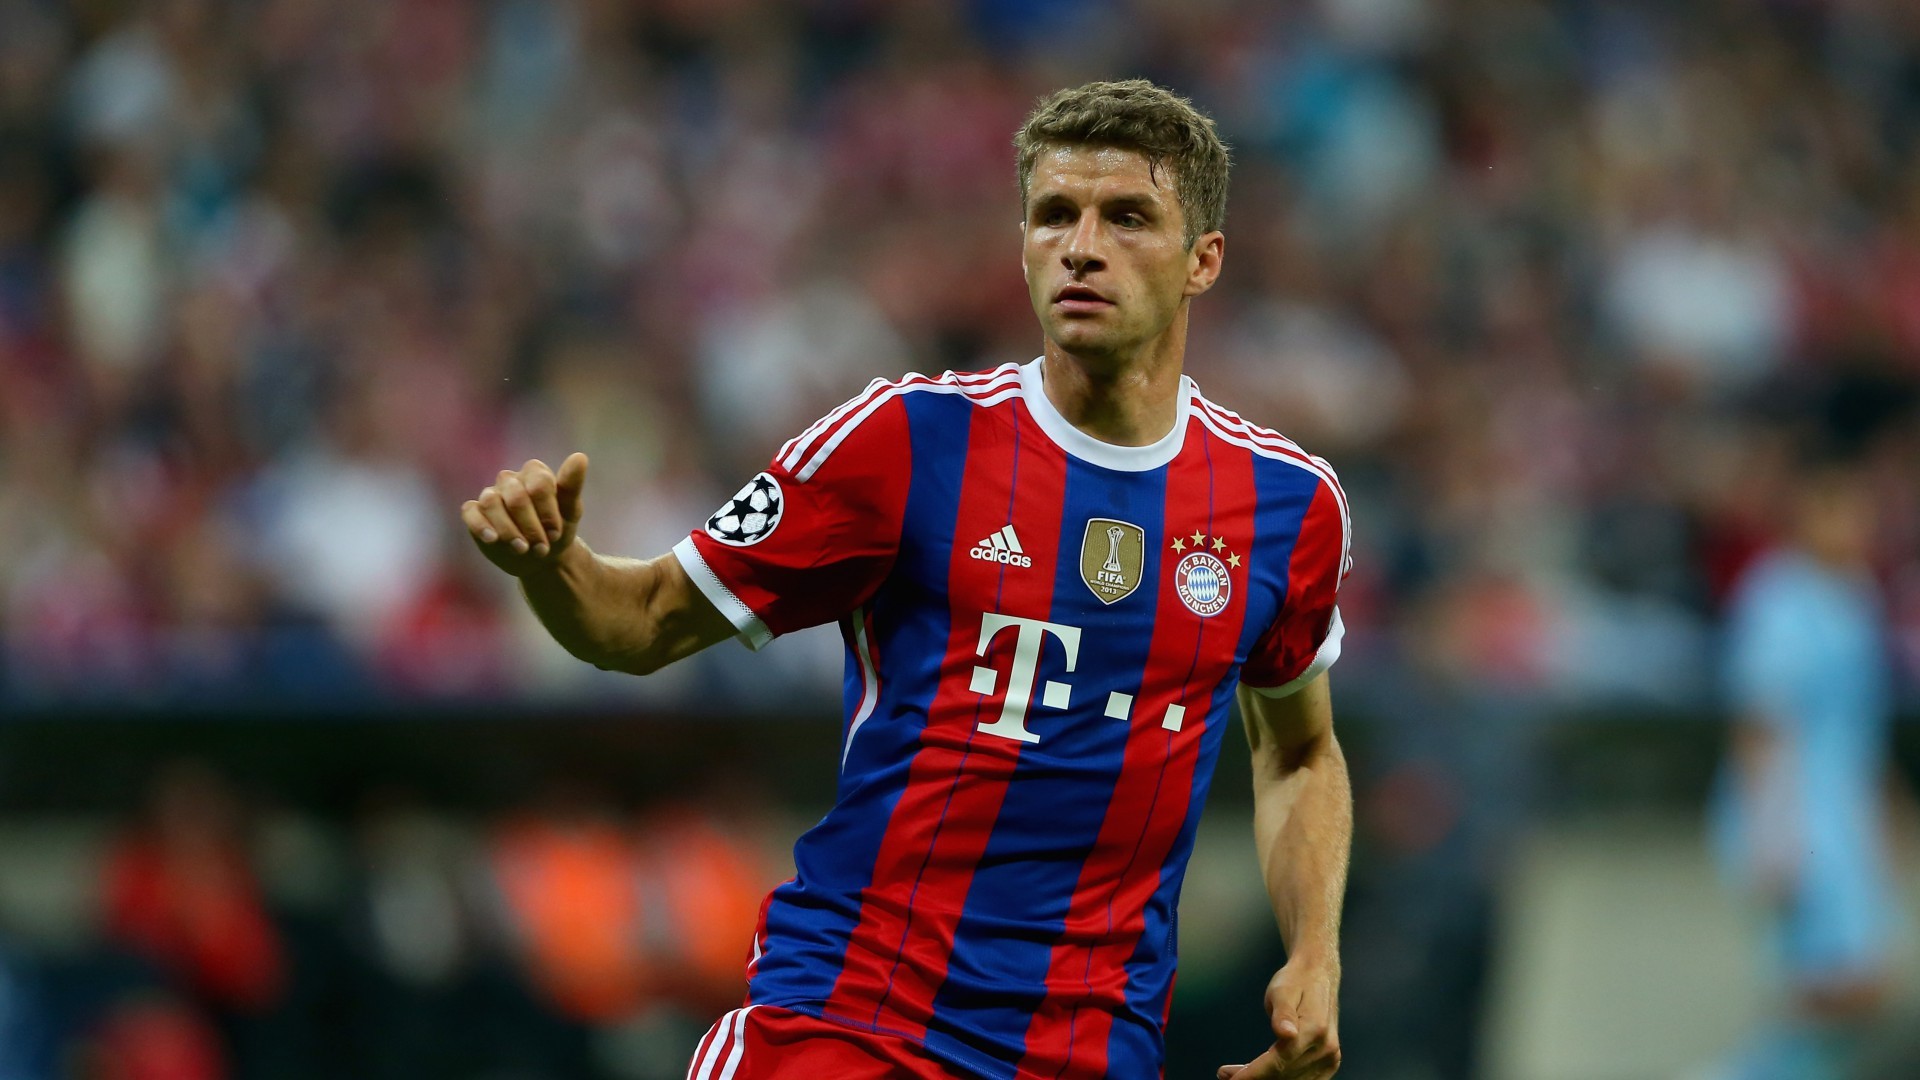 Download wallpapers Thomas Muller, FC Bayern Munich, portrait, red stone  background, football, Bayern Munich for desktop with resolution 2880x1800.  High Quality HD pictures wallpapers